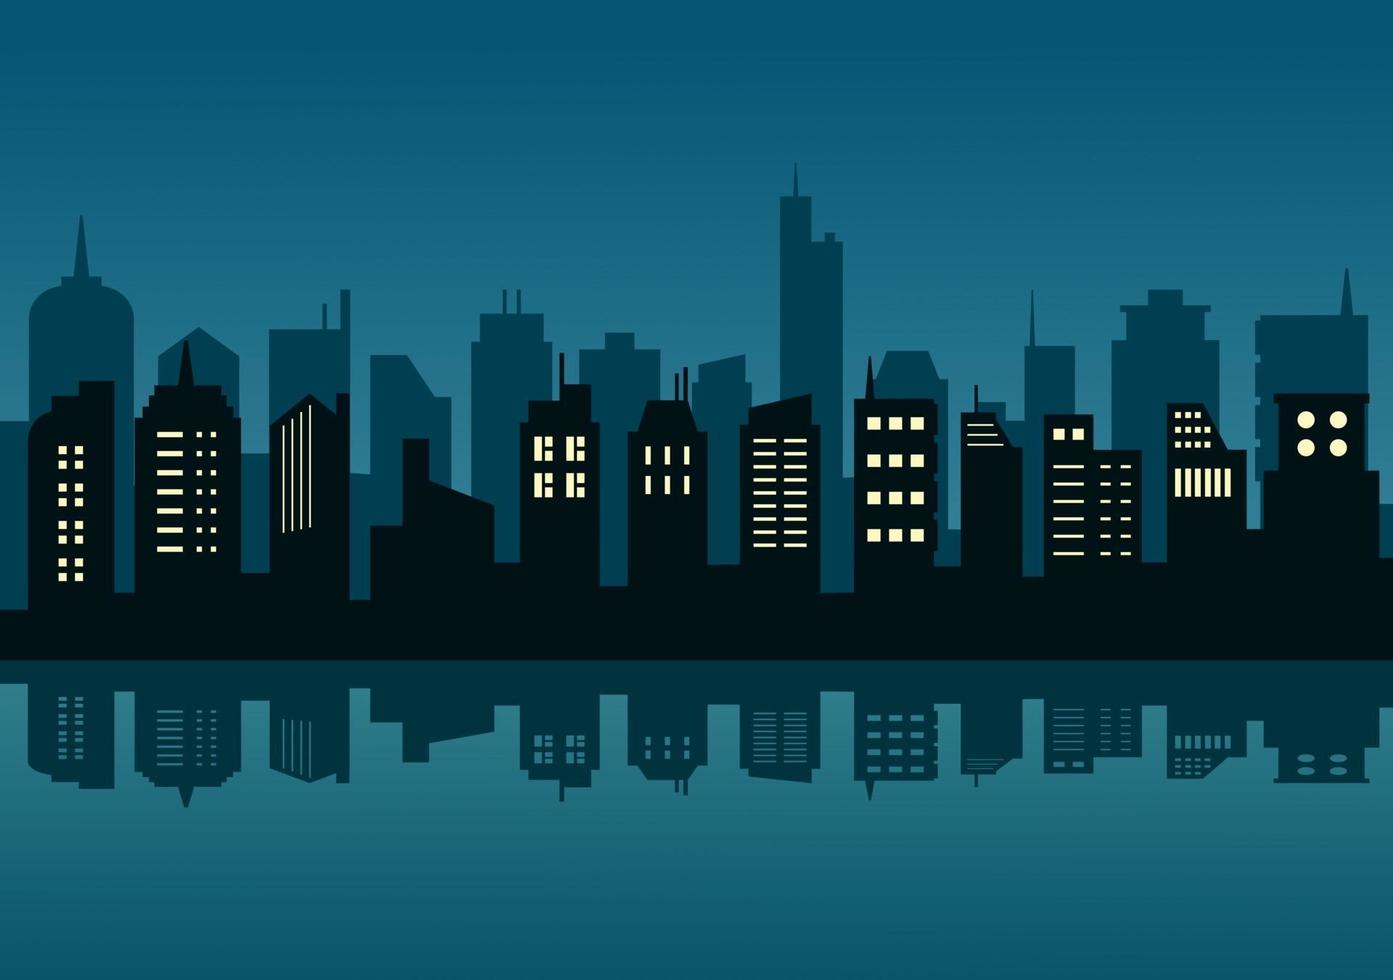 City Landscape Buildings and Architecture Silhouette Vector Background Collage Set